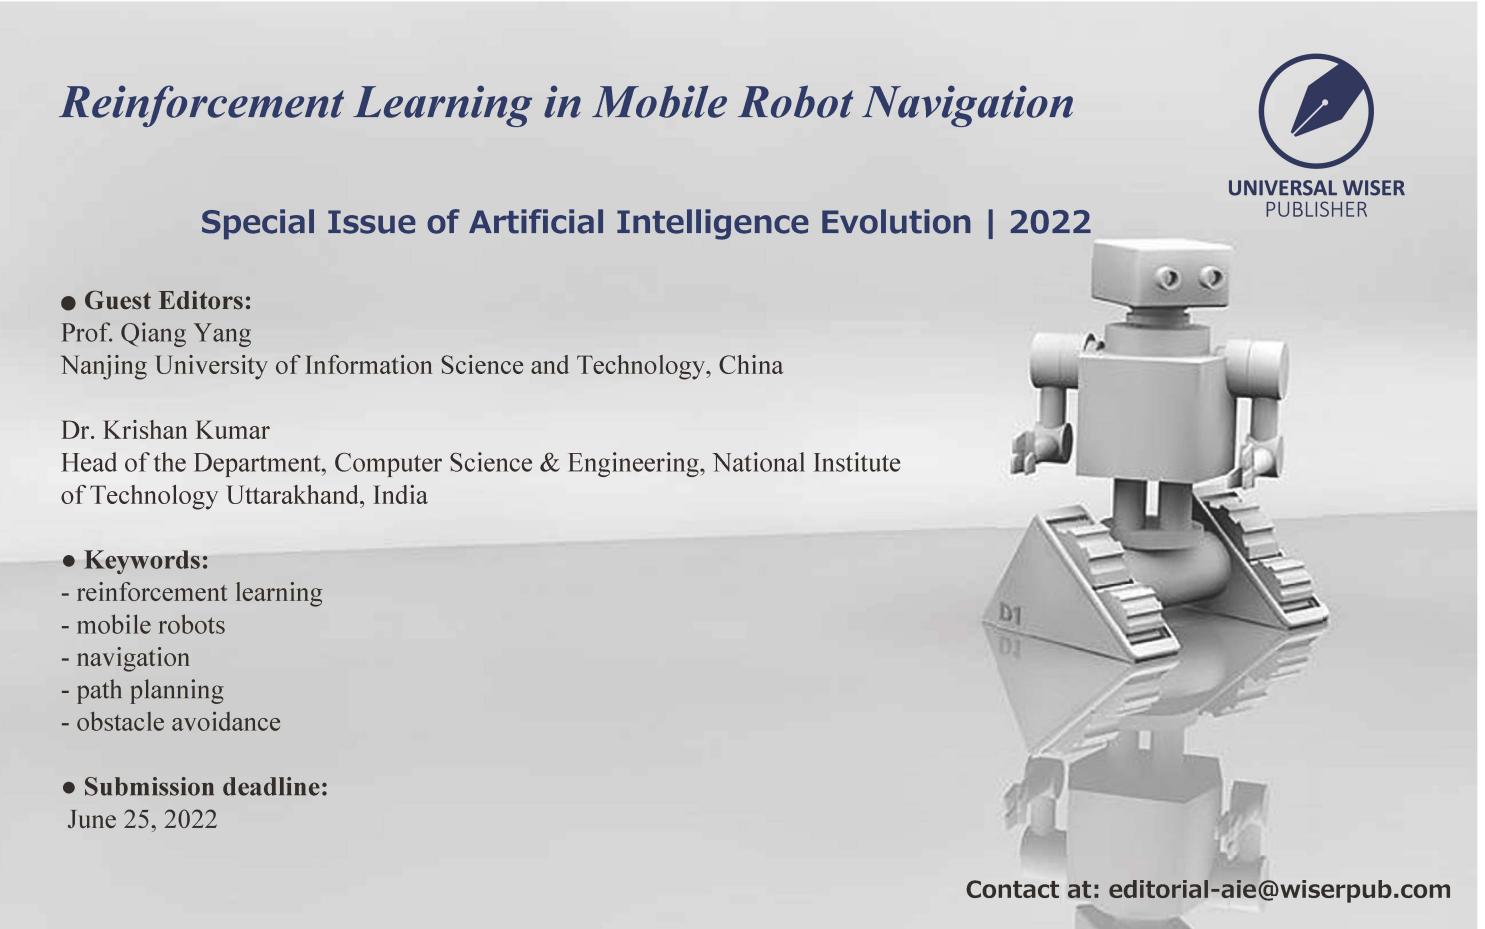 AIE Special Issue “Reinforcement Learning in Mobile Robot Navigation”